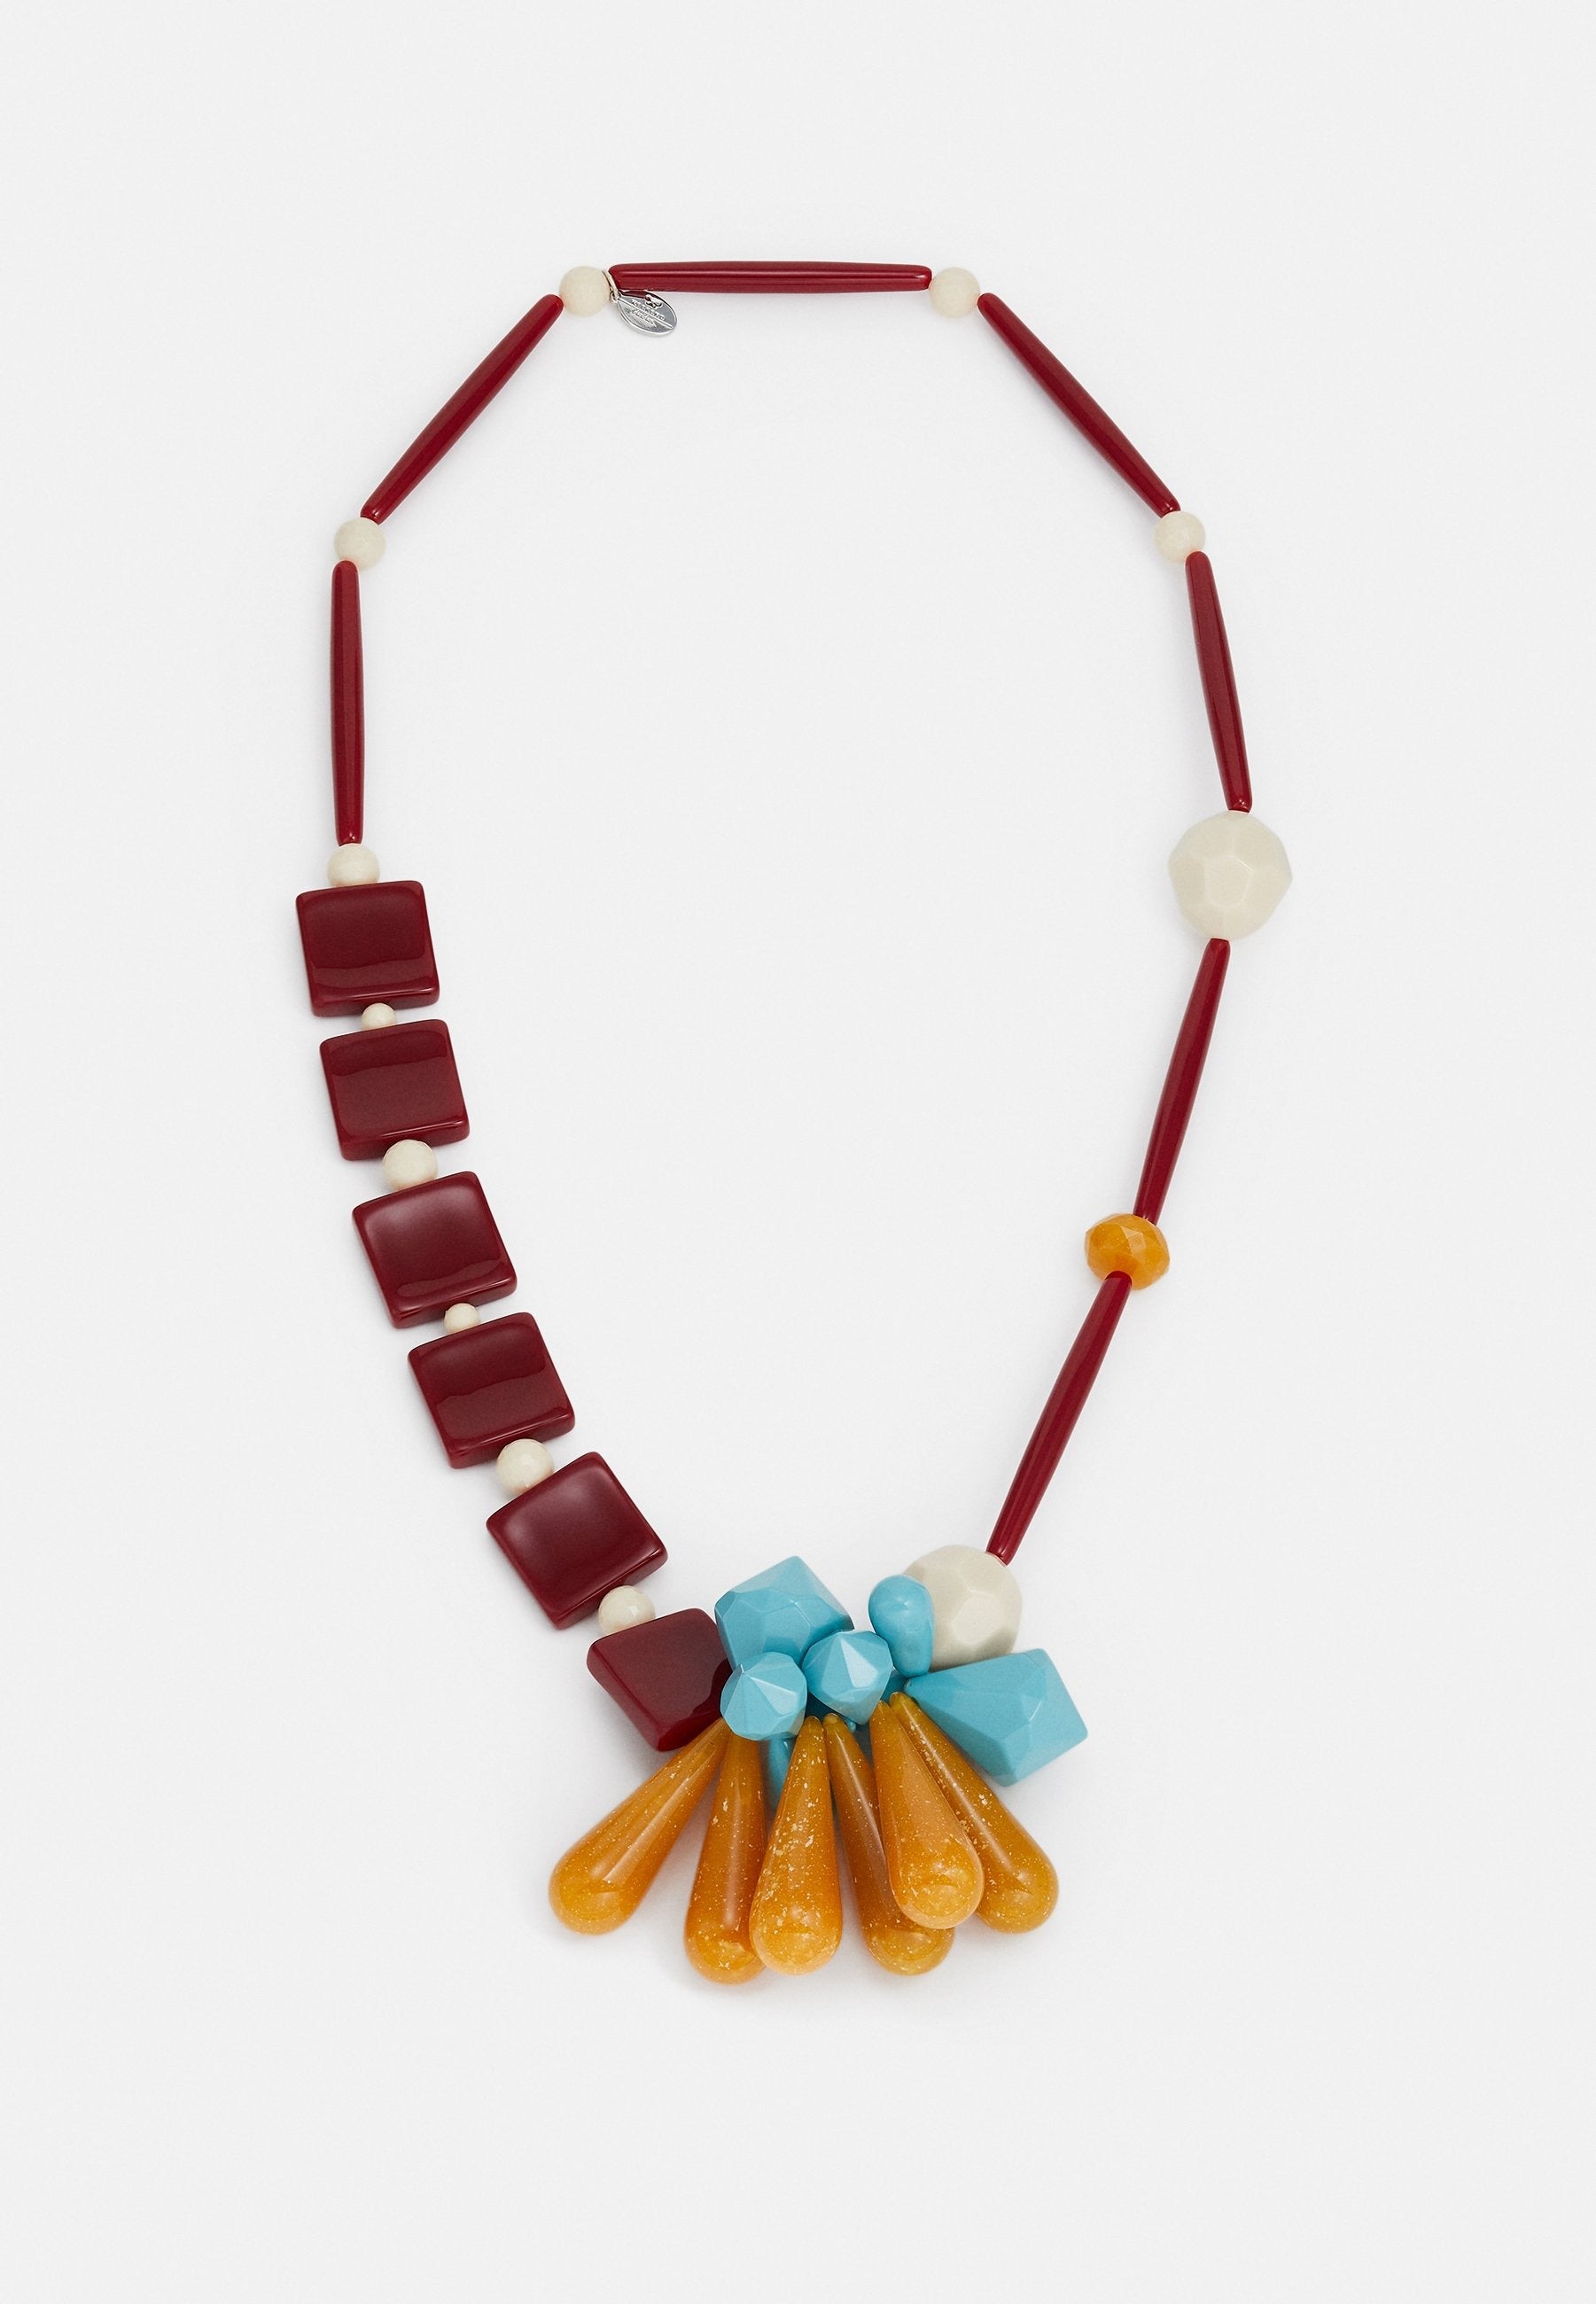 ORNEL necklace